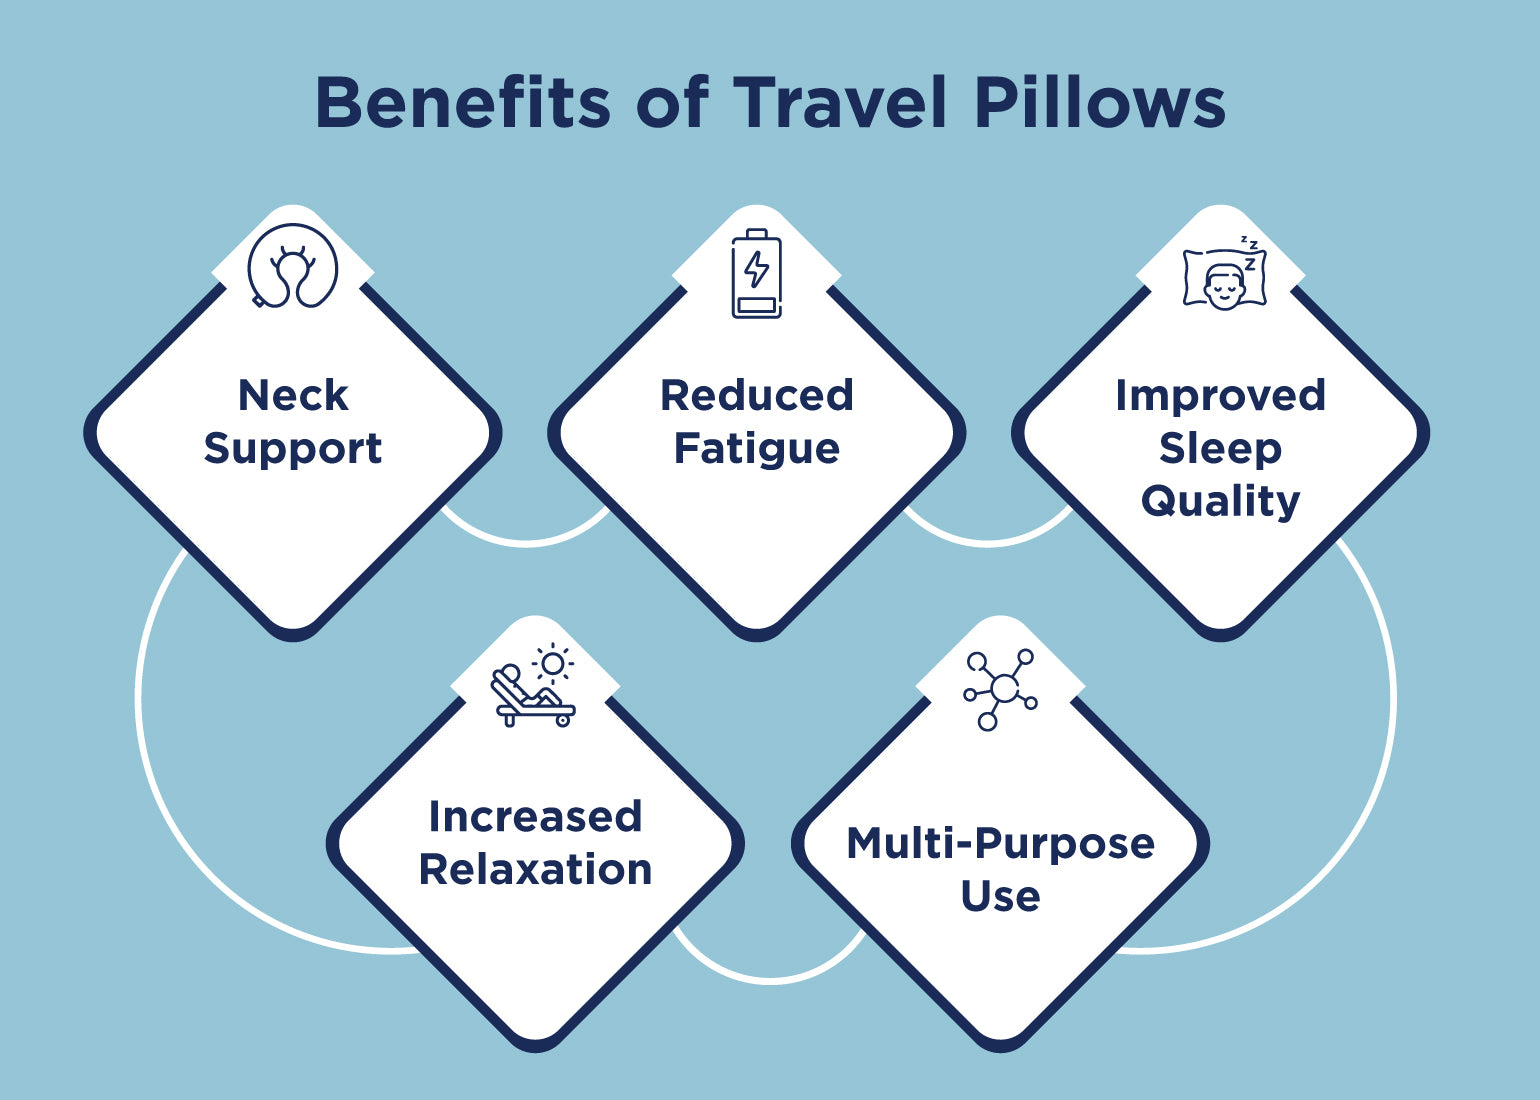 Benefits of Travel Pillows